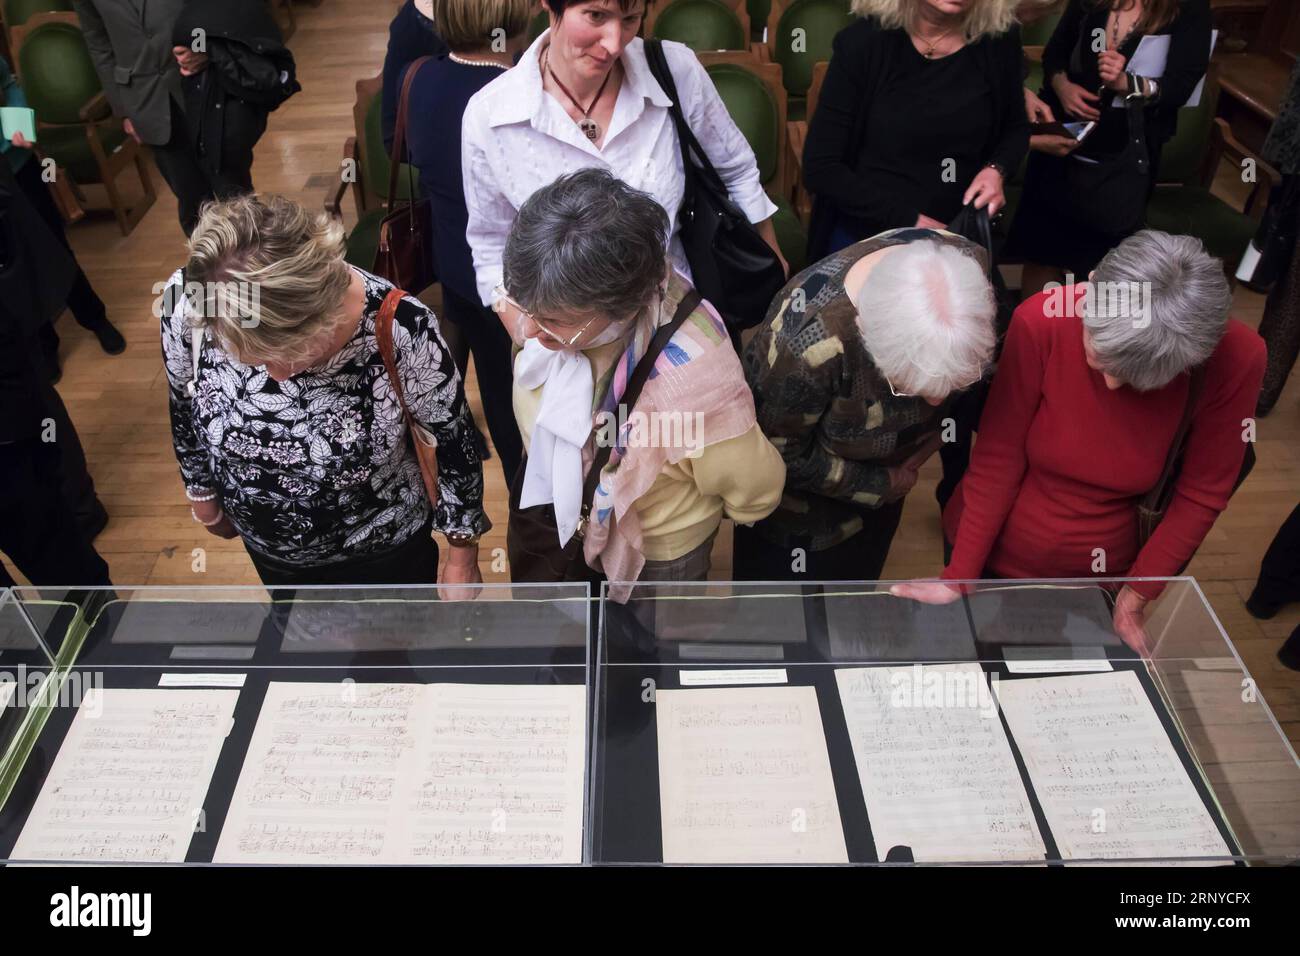 (180311) -- BUDAPEST, March 11, 2018 -- People view Hungarian composer Franz Liszt s manuscripts which are previously thought lost in the Franz Liszt Memorial Museum and Research Center in Budapest, Hungary, on March 10, 2018. The manuscripts believed to be of famous Hungarian composer Franz Liszt were presented in the museum on Saturday in a solemn ceremony.)(gj) HUNGARY-BUDAPEST-LISZT-MANUSCRIPTS AttilaxVolgyi PUBLICATIONxNOTxINxCHN Stock Photo